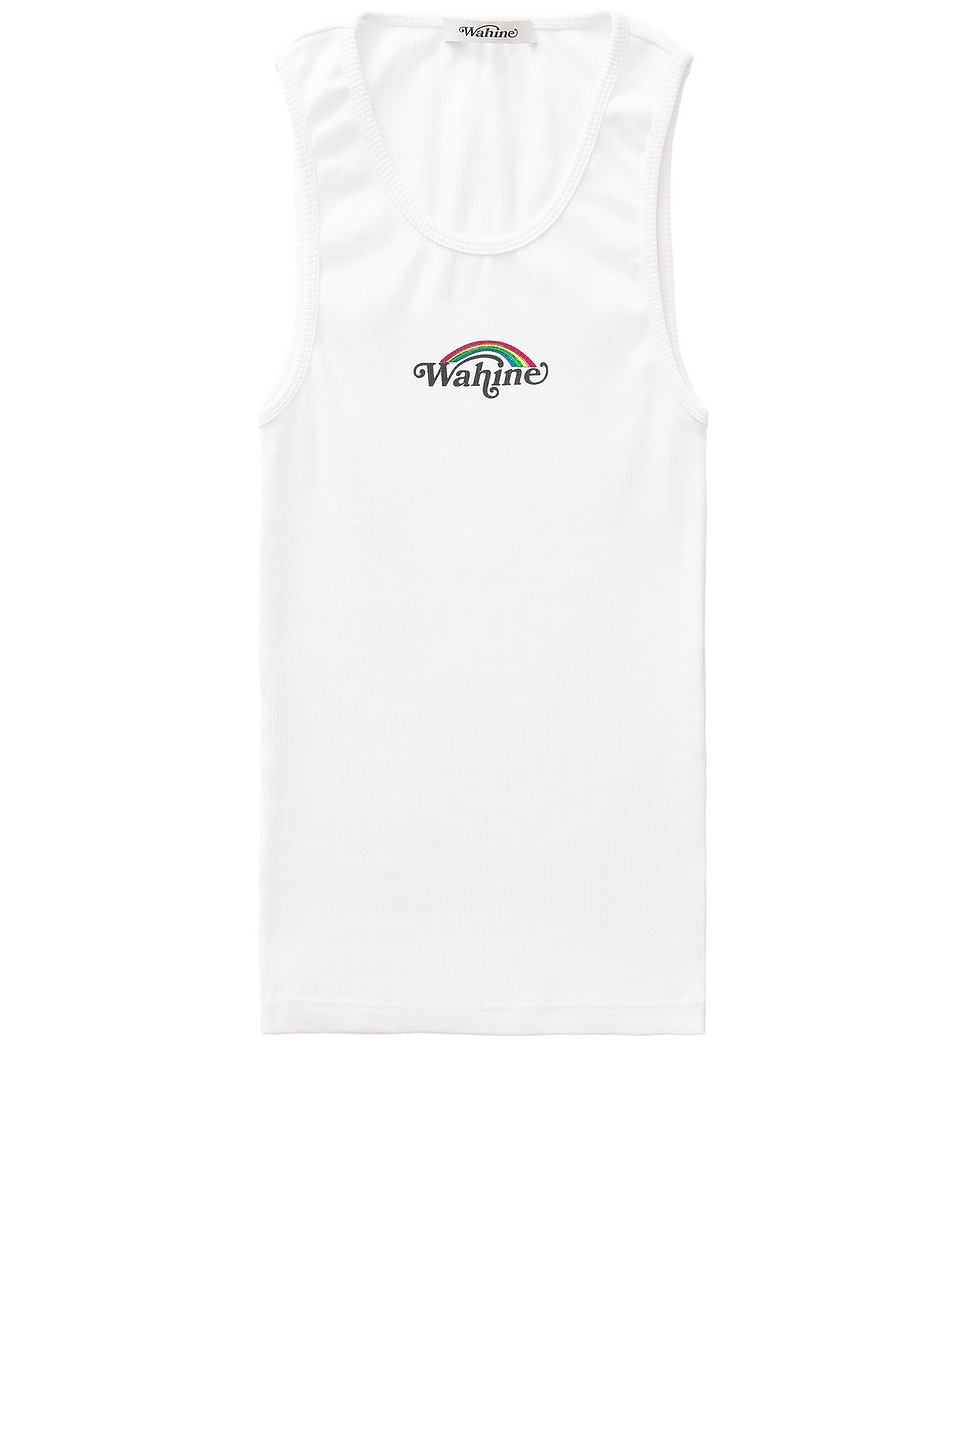 Image 1 of Wahine Tank Top in White